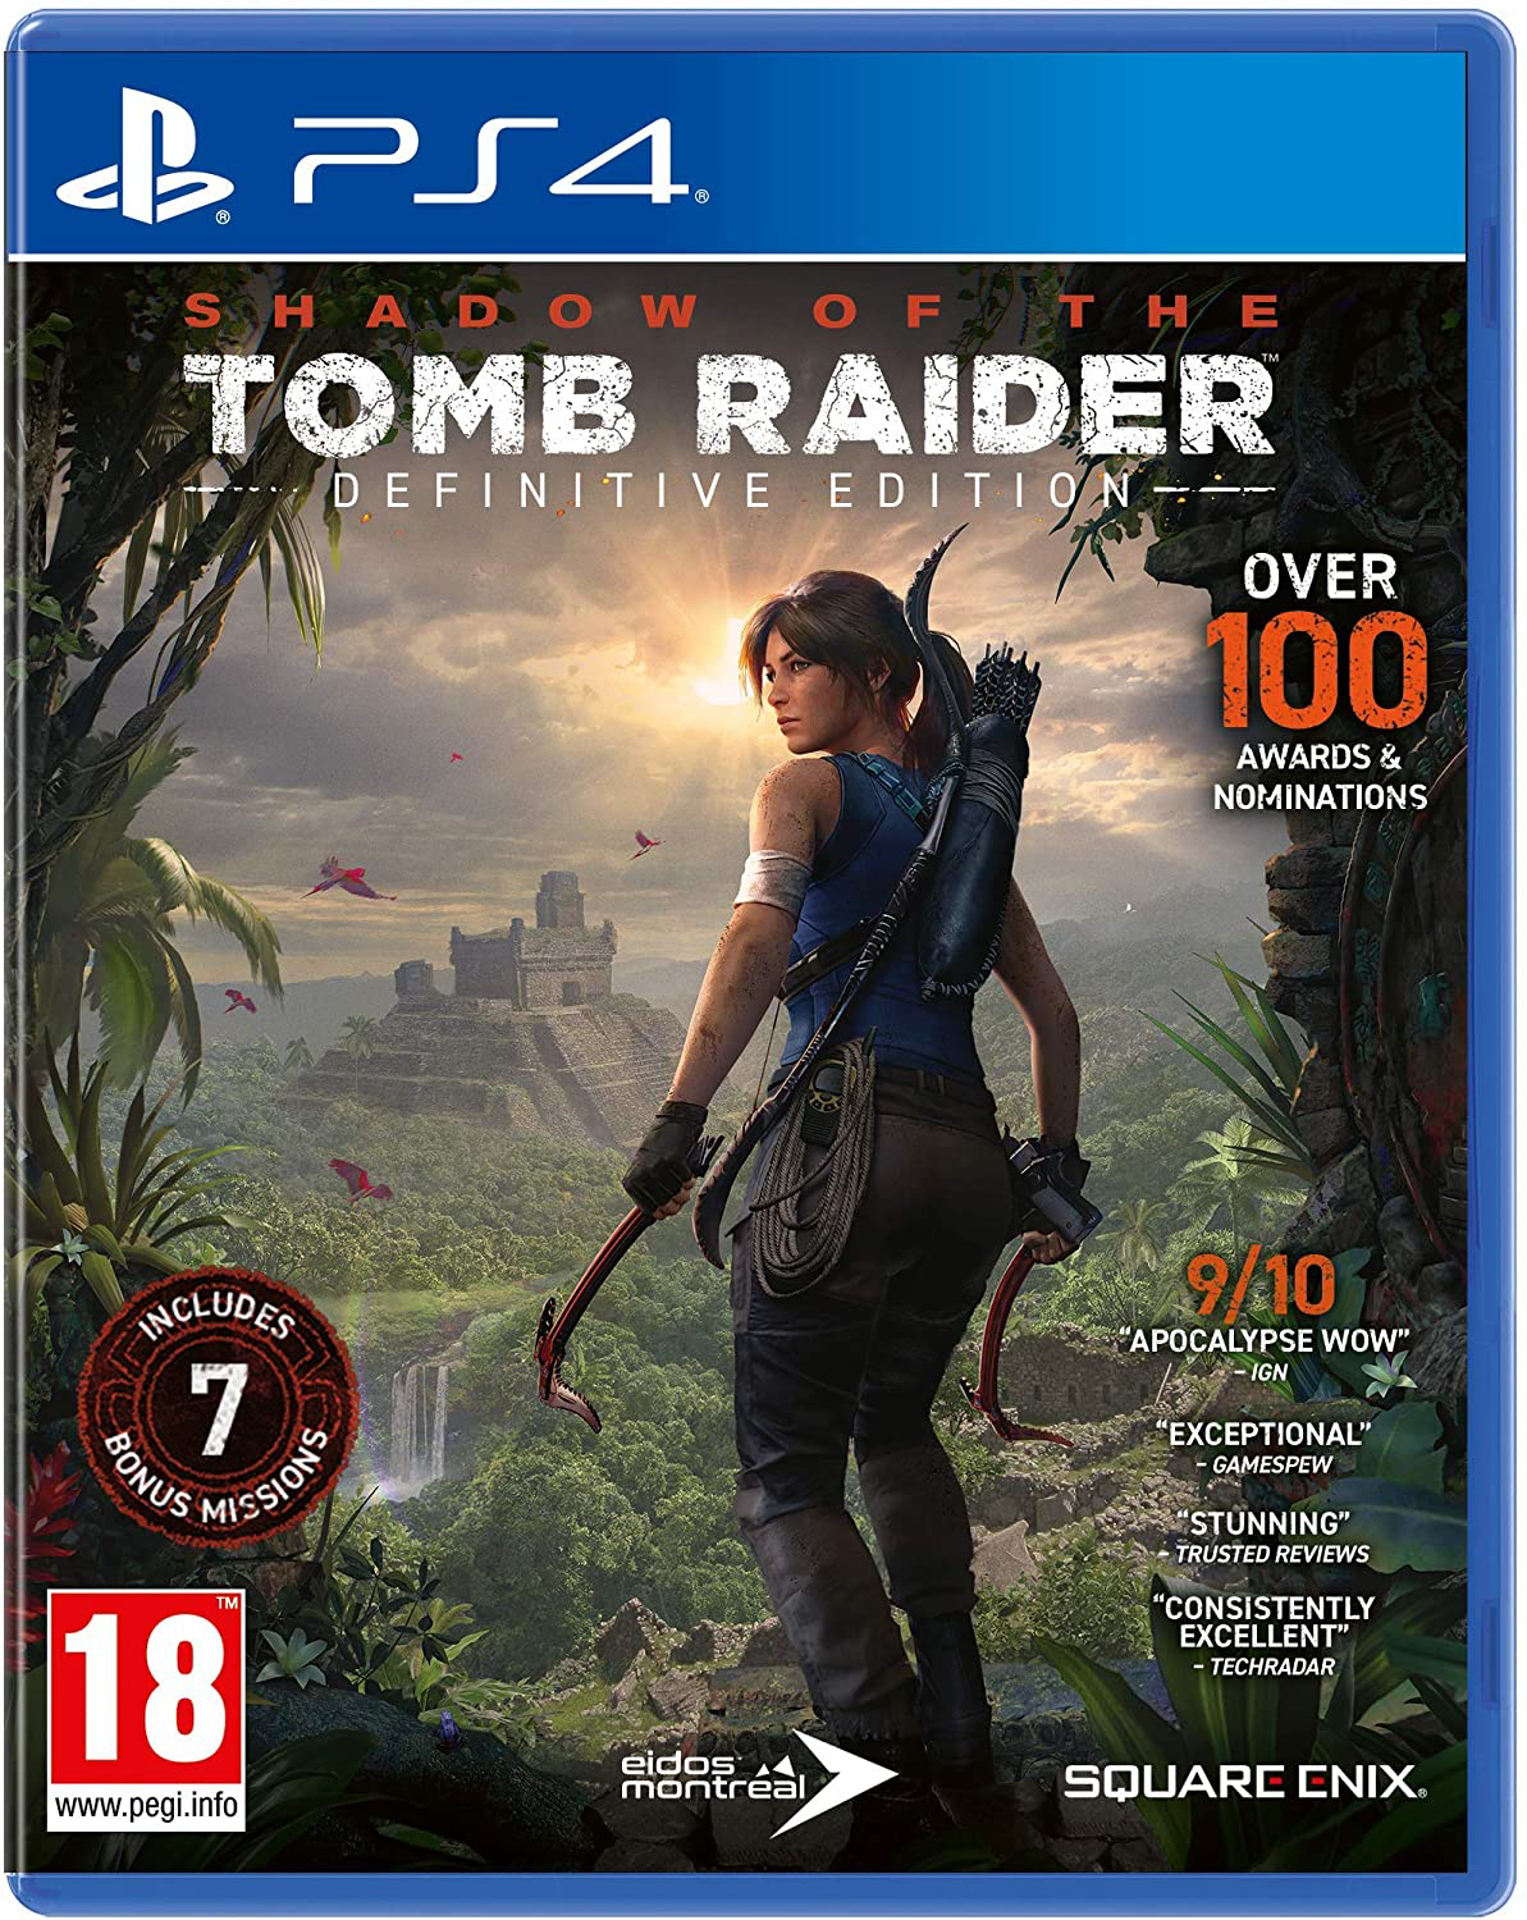 § Shadow of The Tomb Raider Definitive Edition